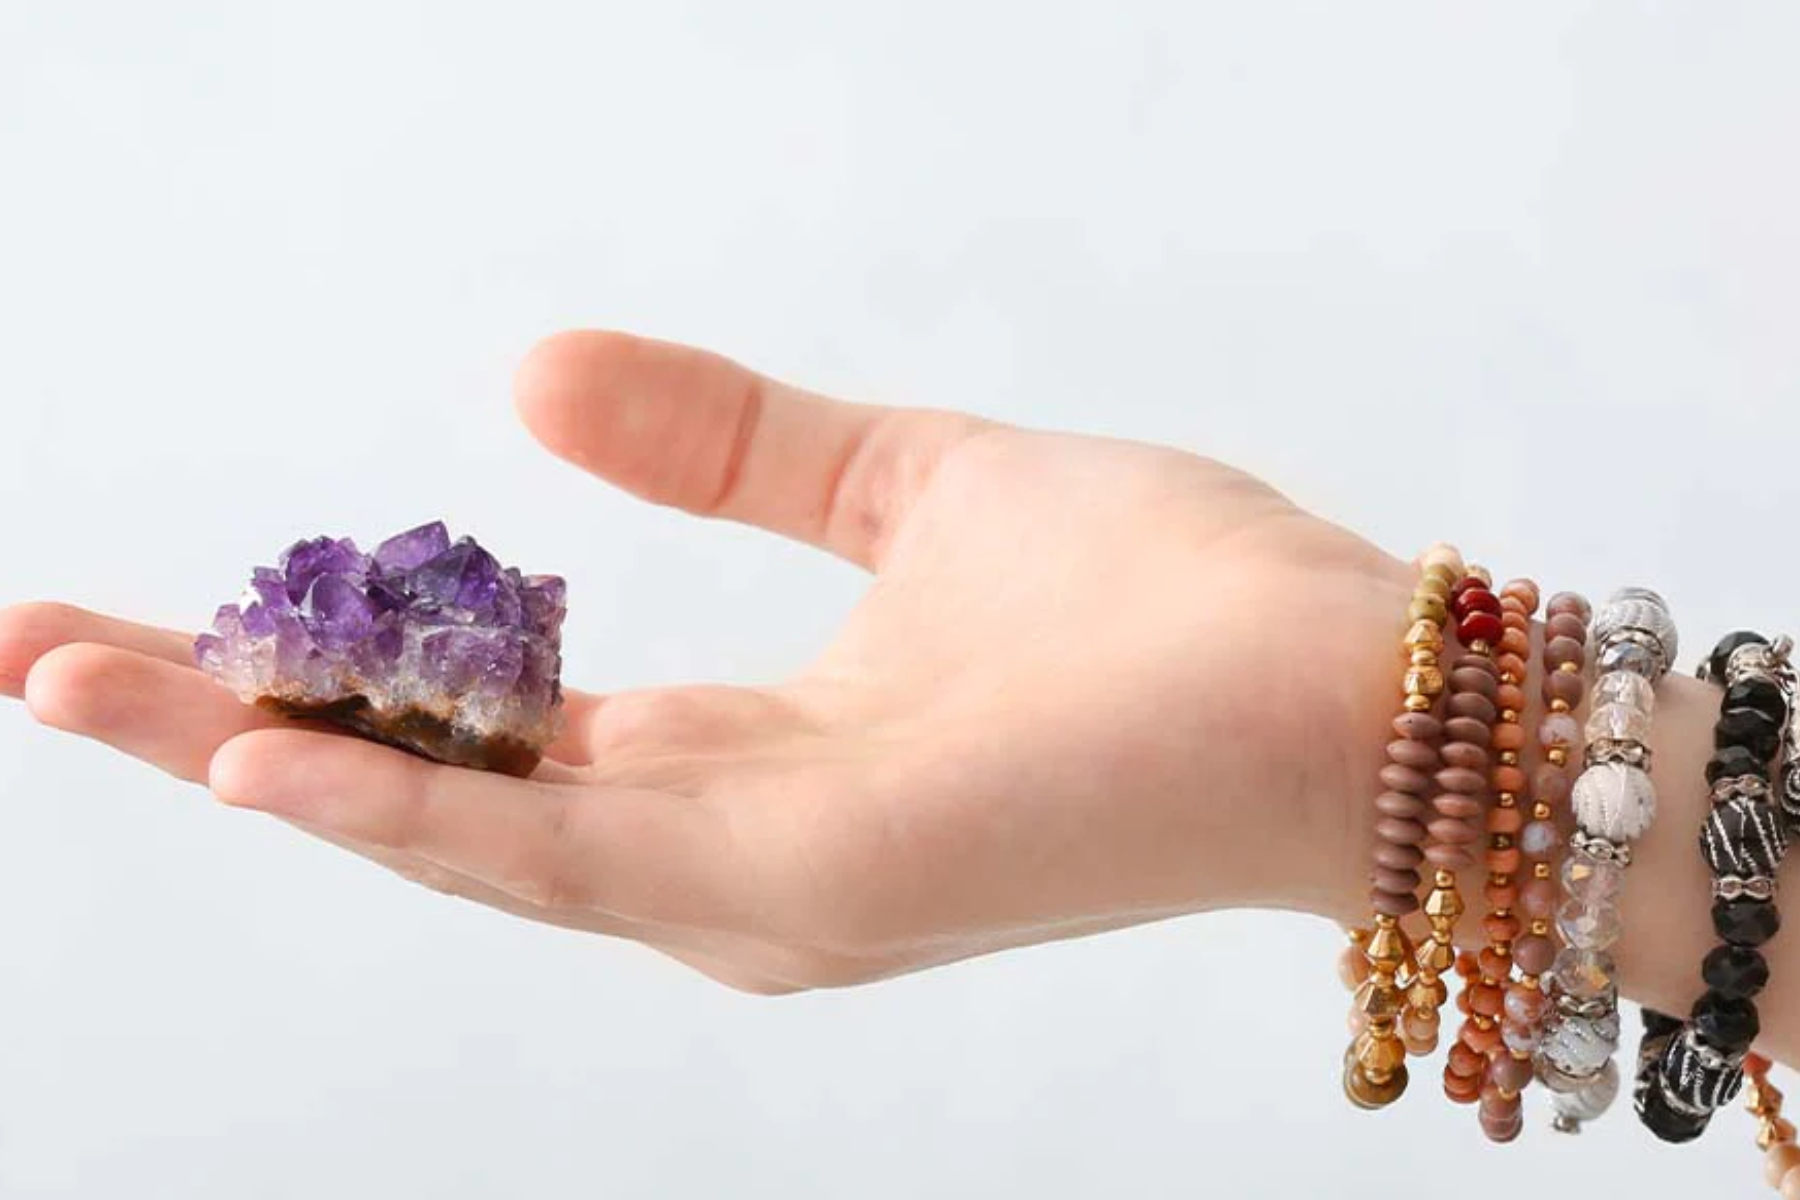 A close-up of a woman's hand showcasing a small raw amethyst resting on her palm